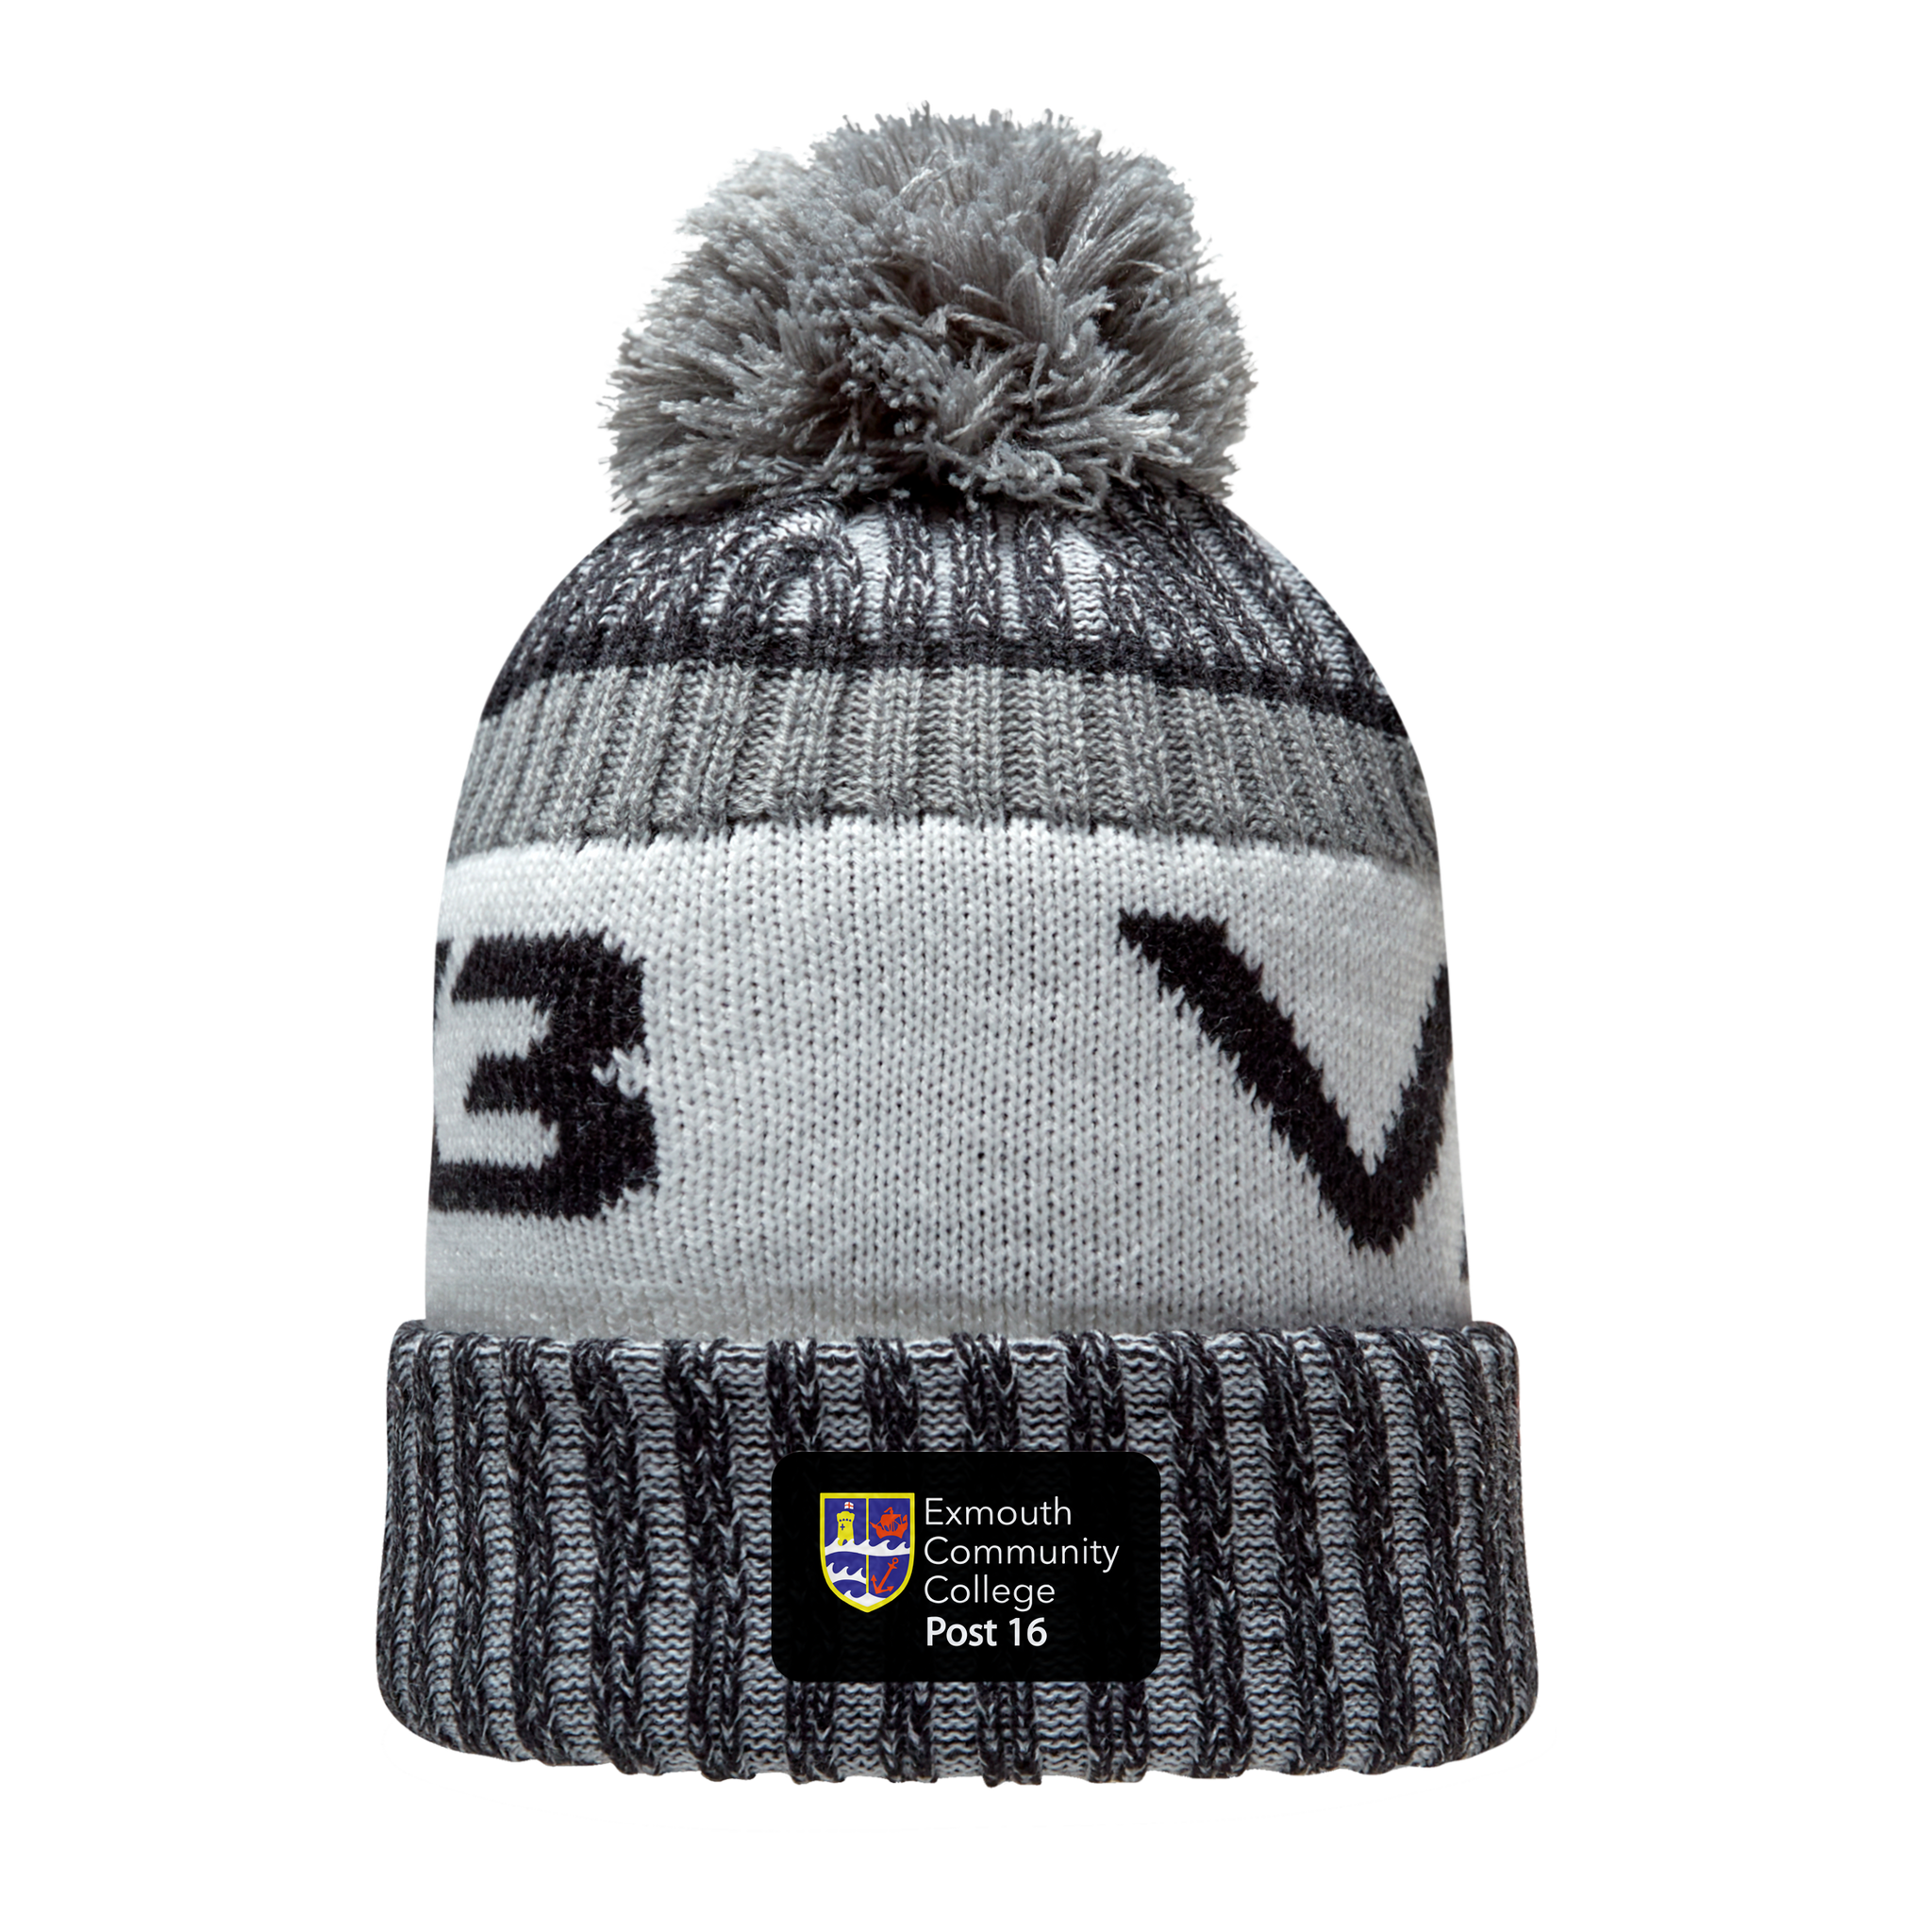 Exmouth Community College Marl Bobble Hat